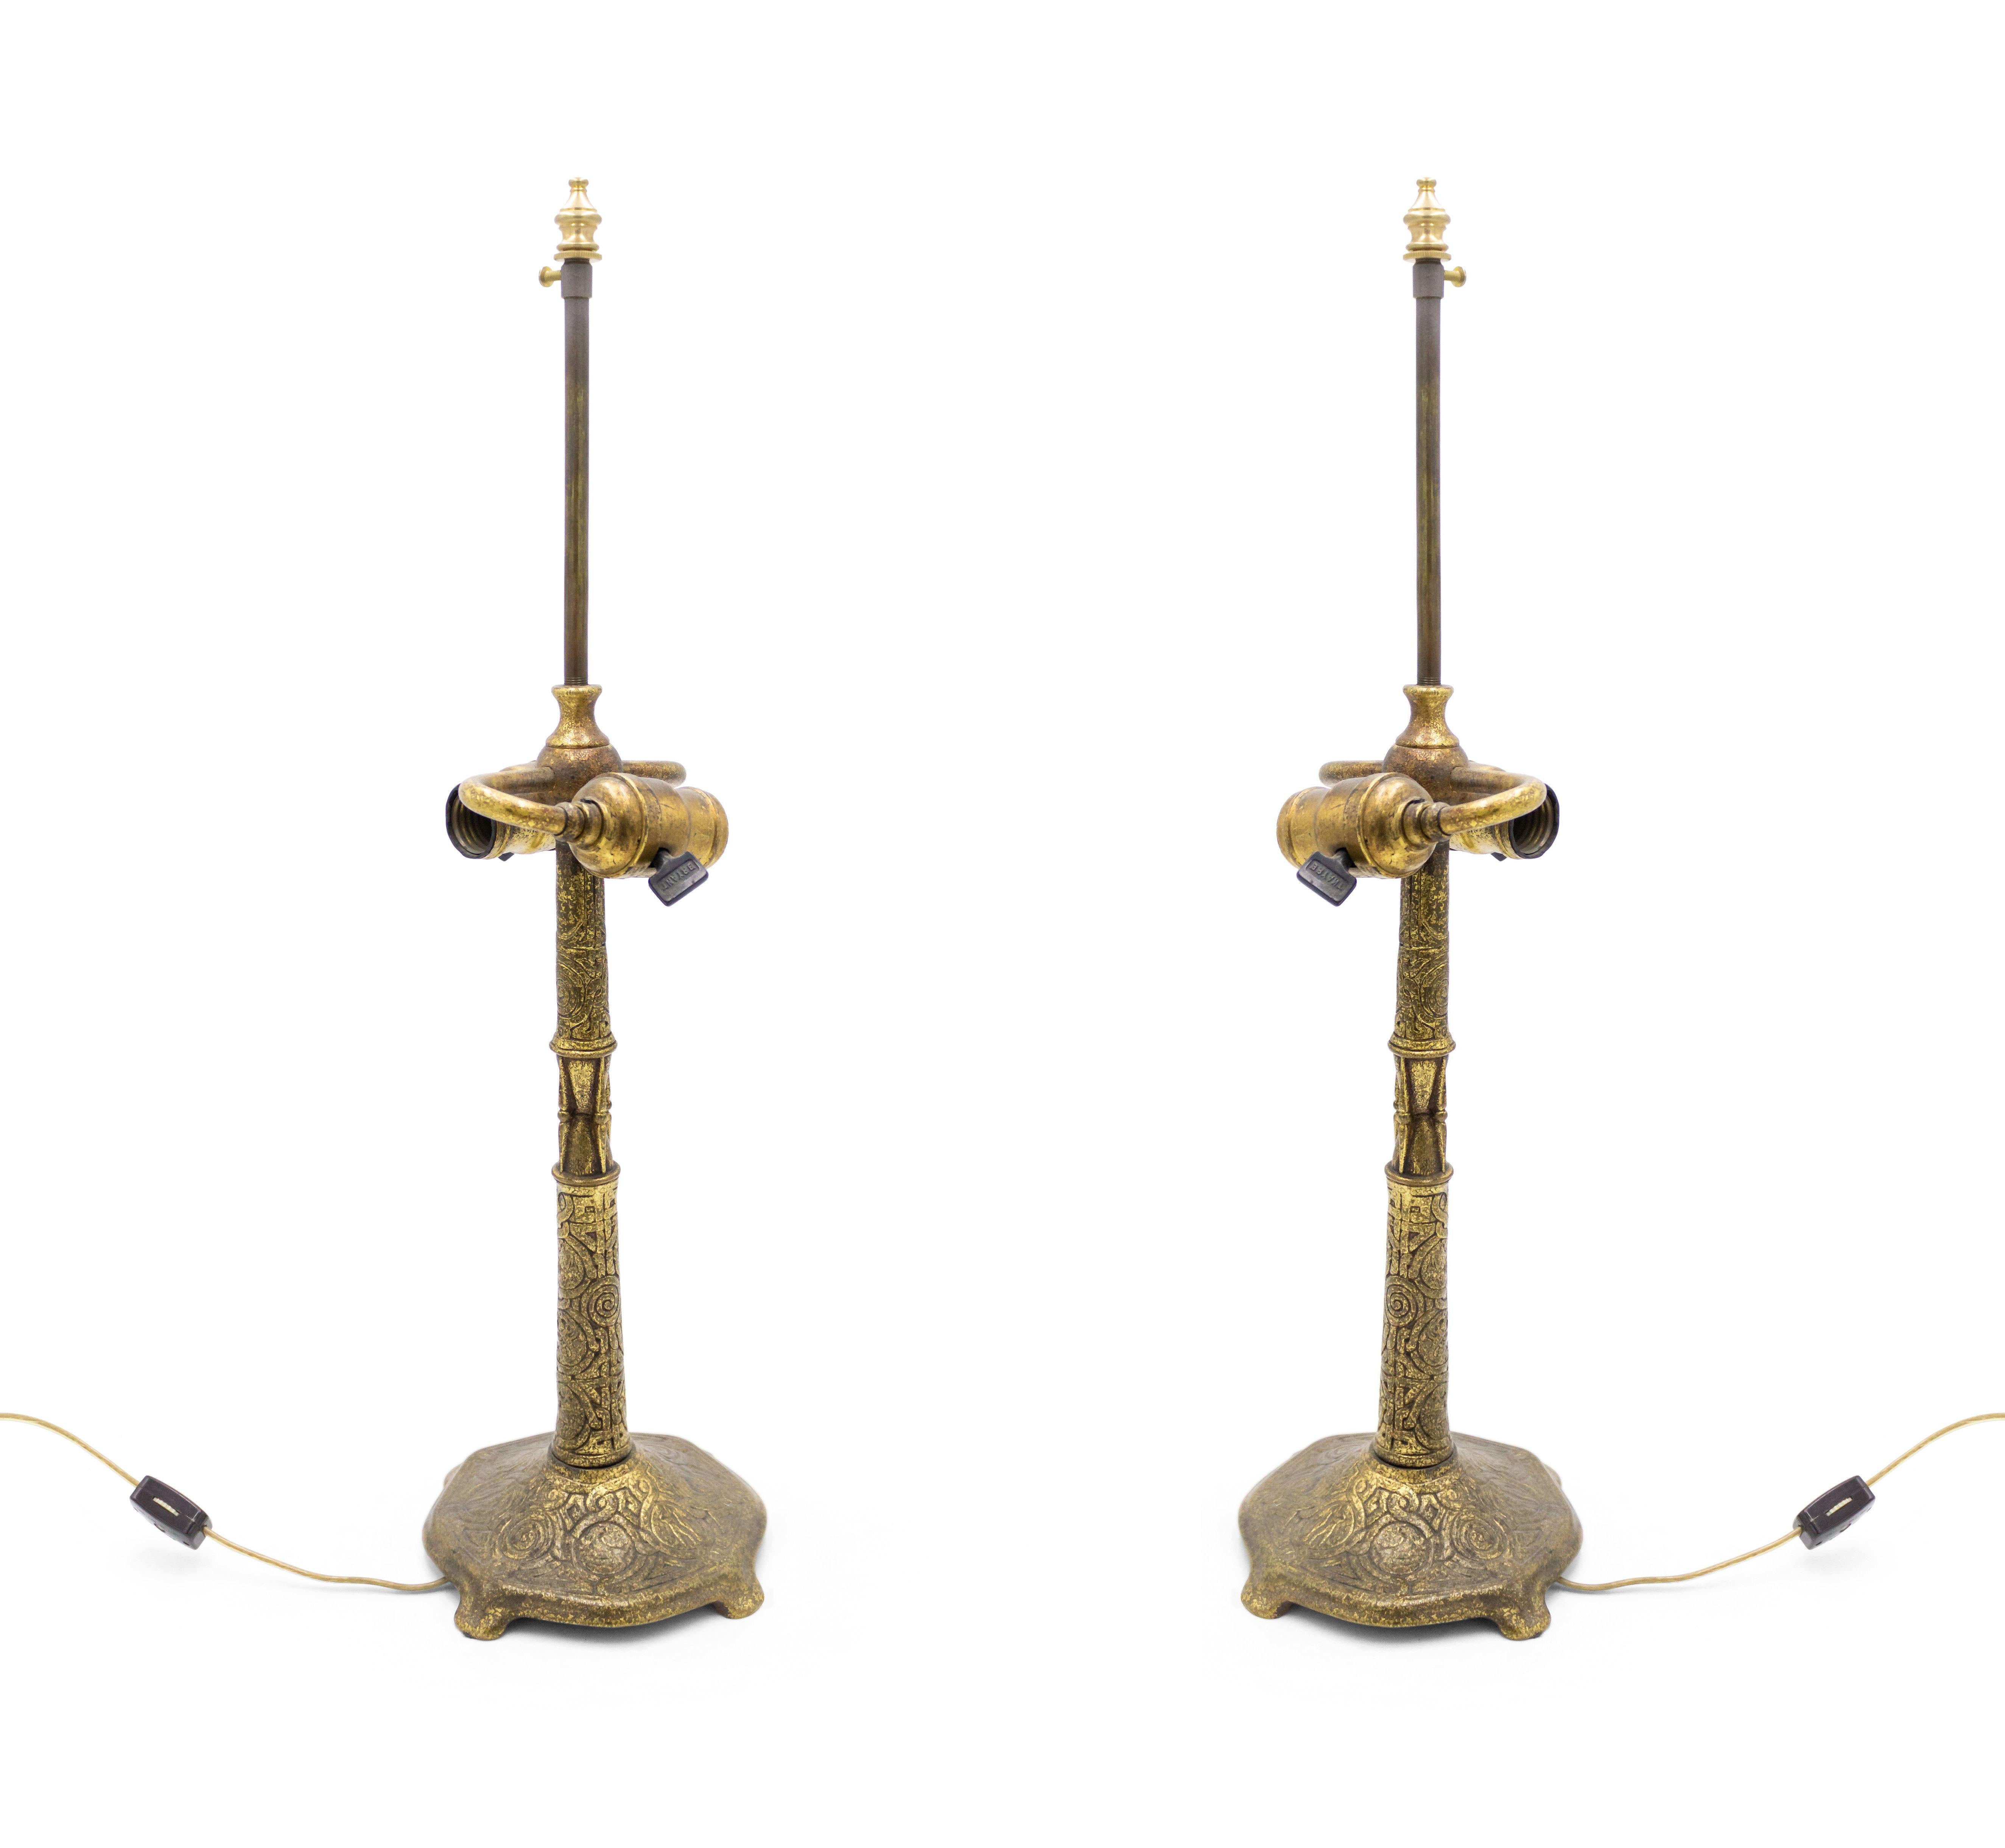 Pair of American Victorian bronze dore table lamps (signed: TIFFANY) (PRICED AS Pair).
